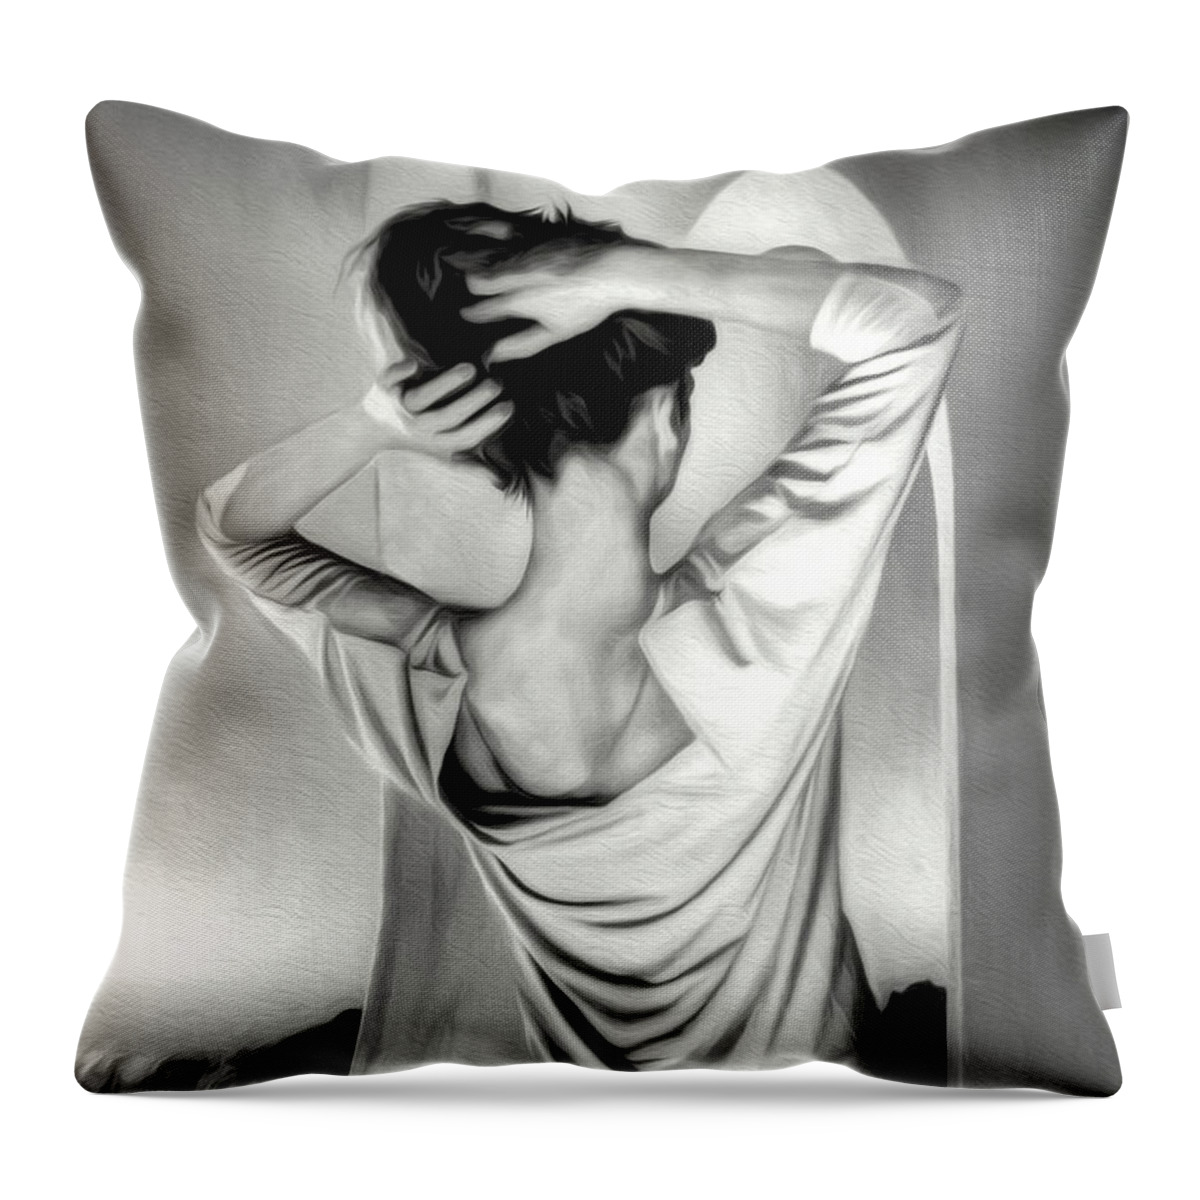 Woman Throw Pillow featuring the digital art Endless Skys by Pennie McCracken